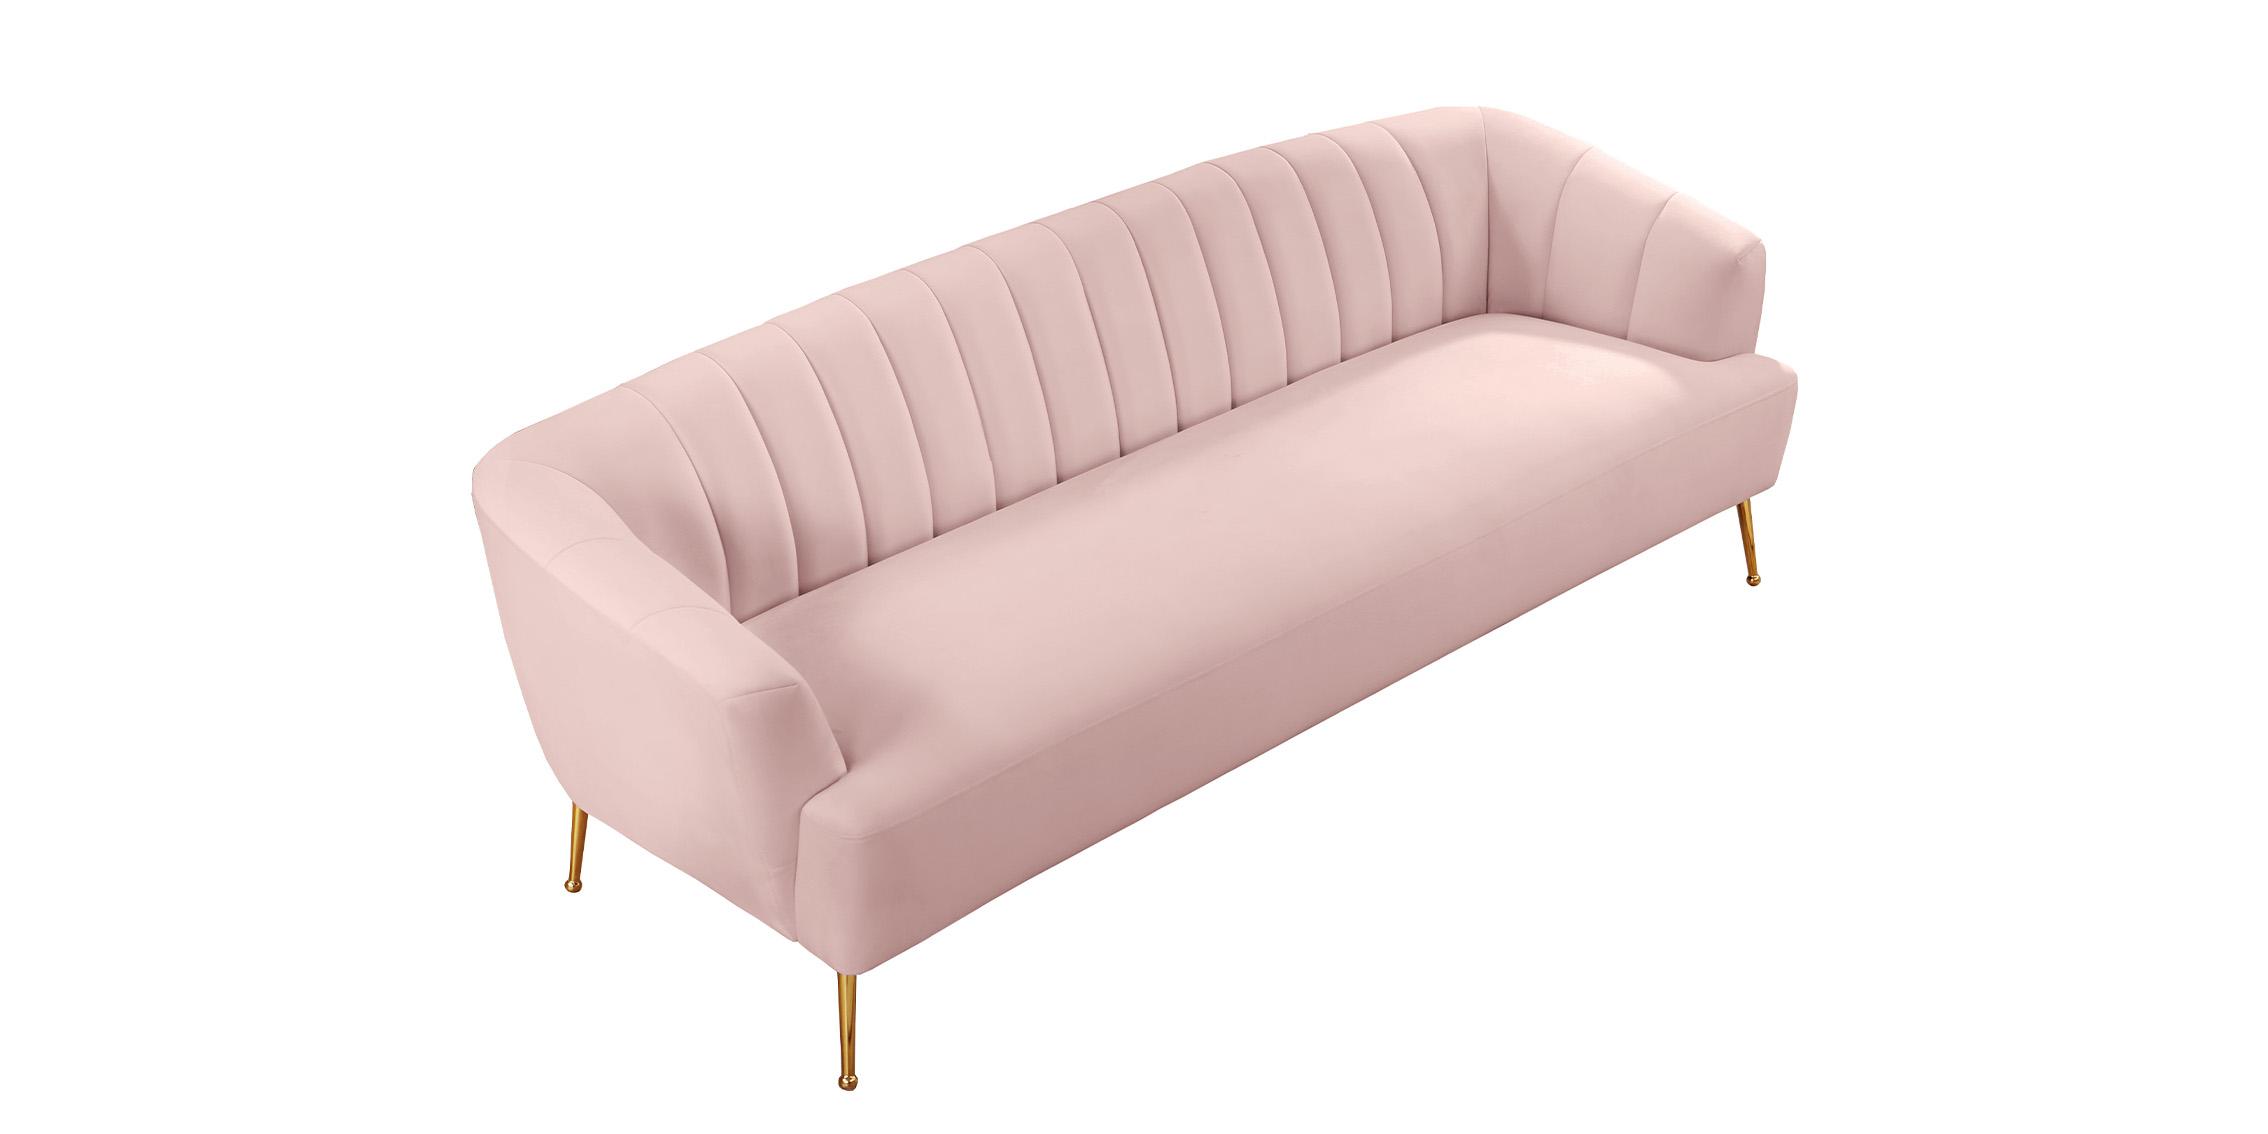 

    
Glam Pink Velvet Channel Tufted Sofa TORI 657Pink-S Meridian Modern Contemporary
